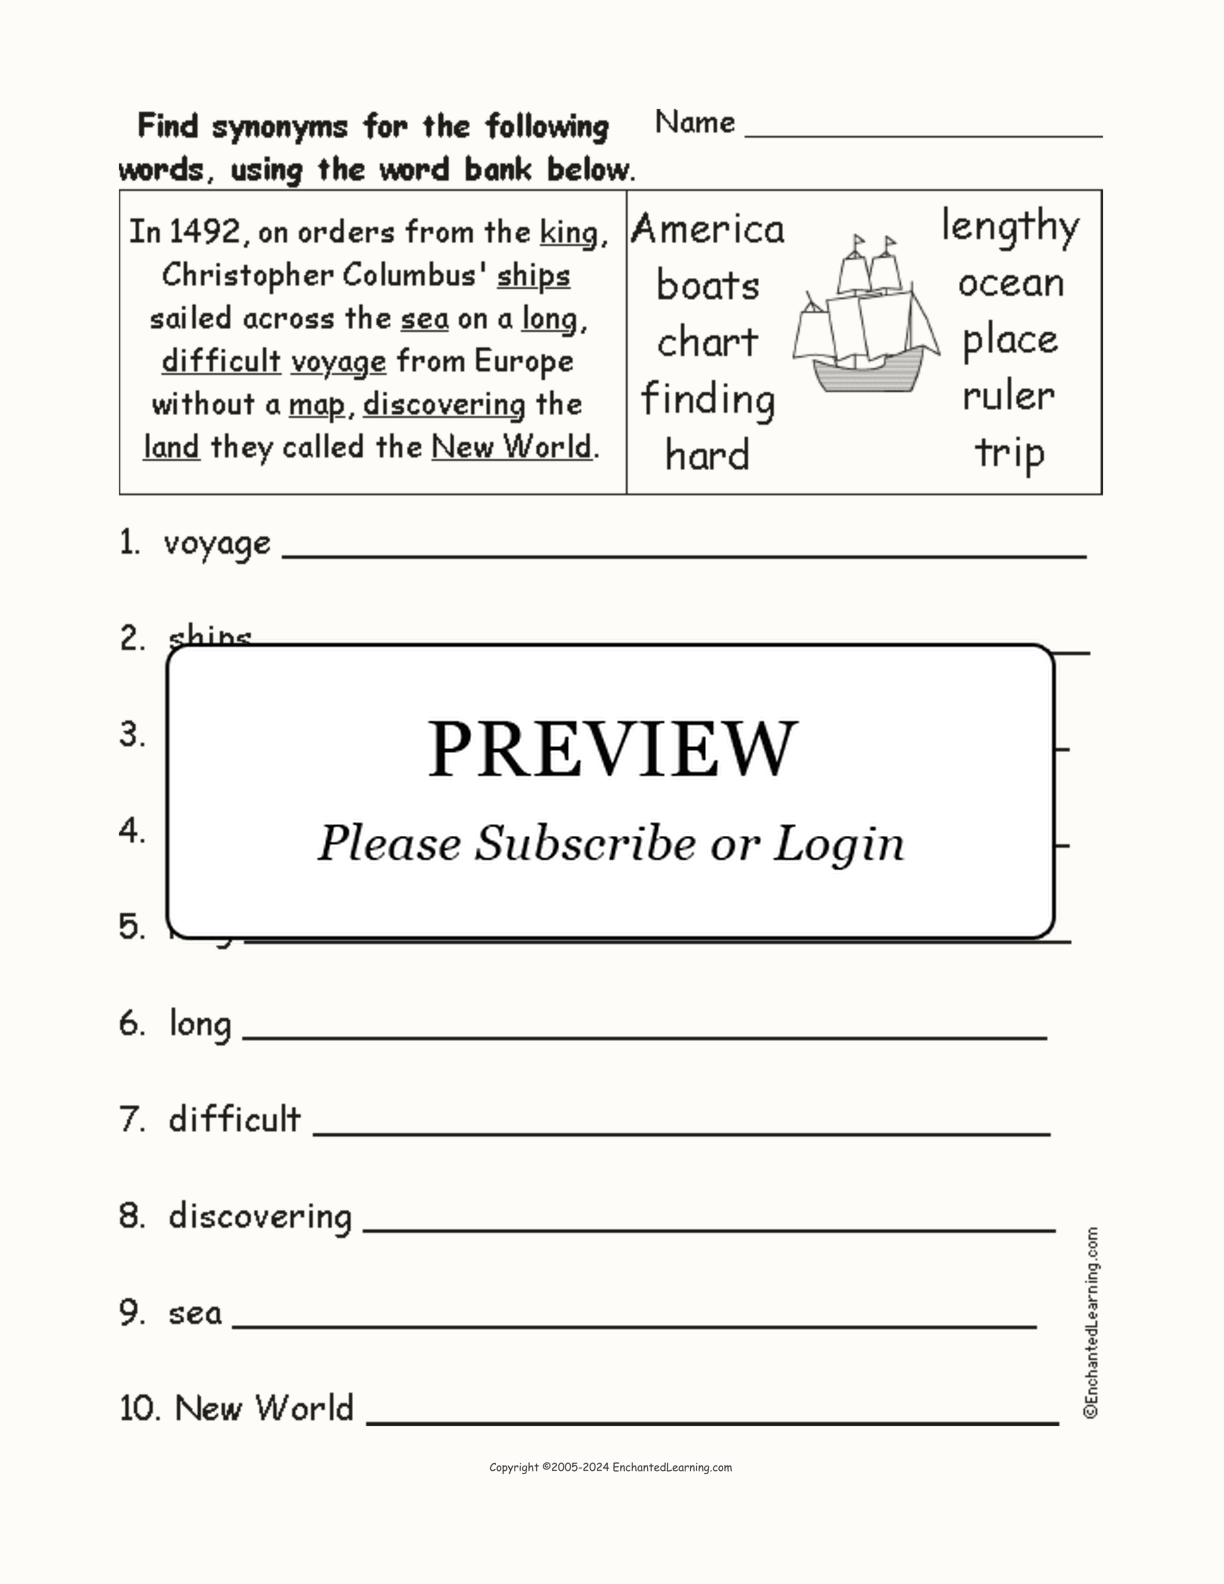 Columbus Day Synonyms interactive worksheet page 1